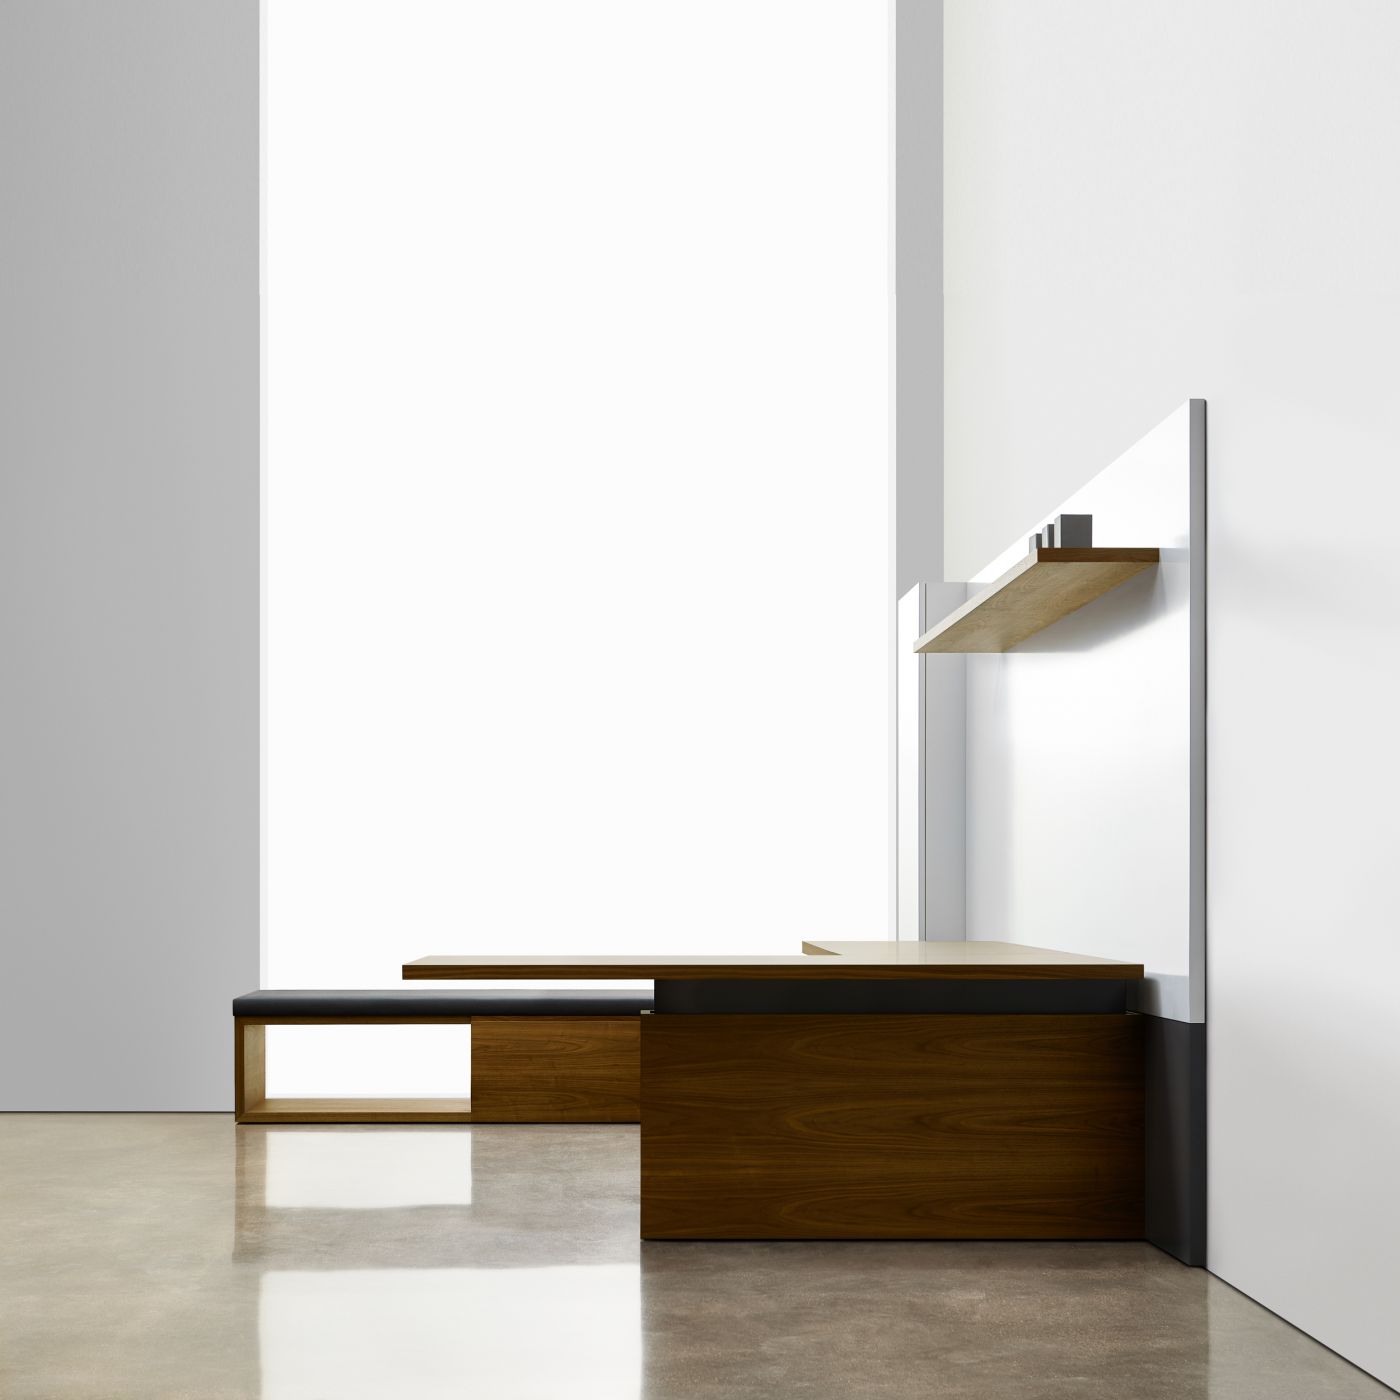 Minimalist lines expressed in a timeless design.